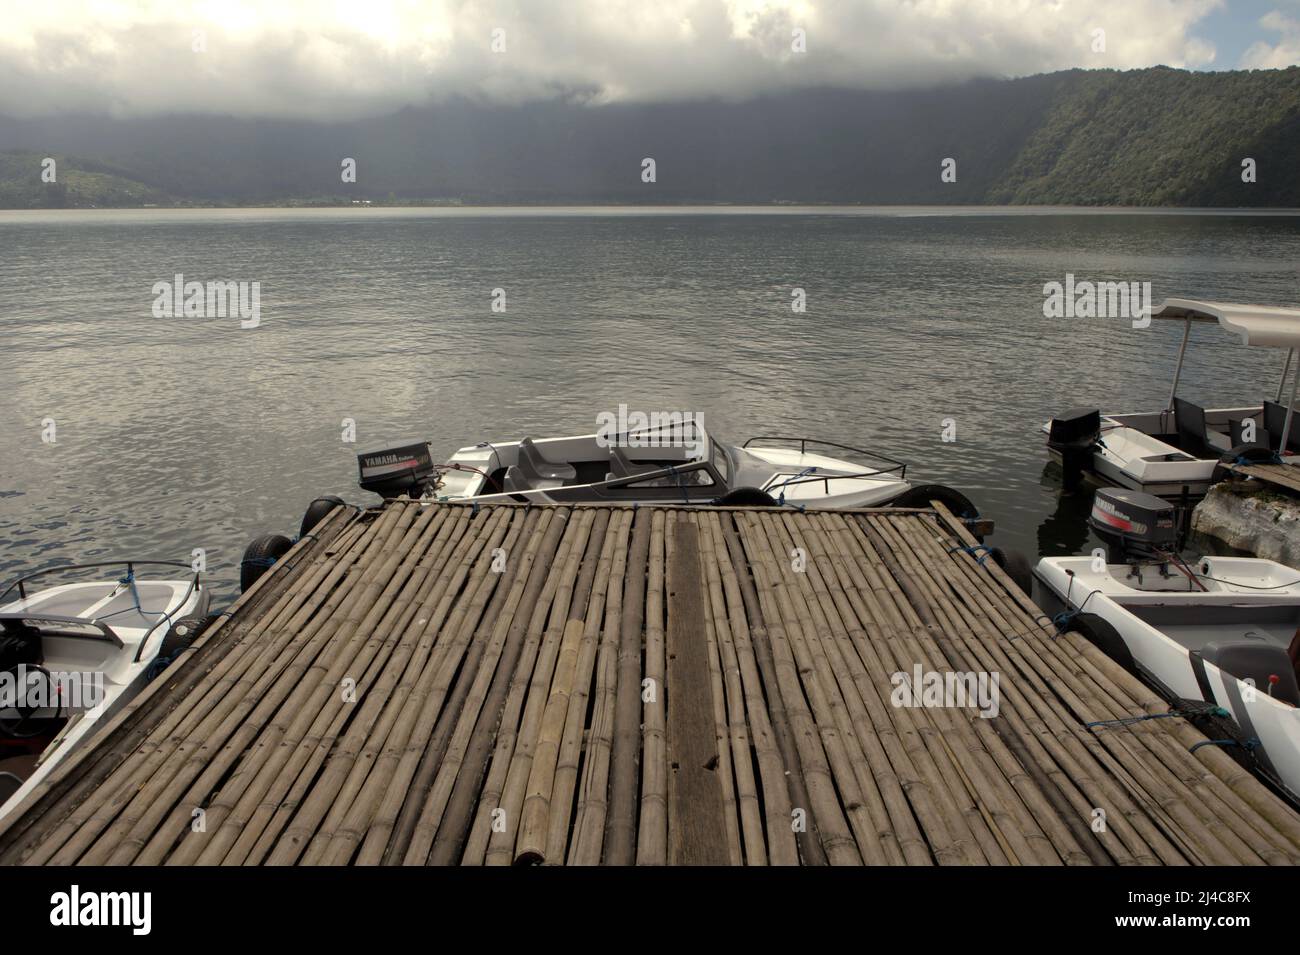 Bratan lake jetty at Bedugul water sport recreational area in Bedugul, Tabanan, Bali, Indonesia. Bratan lake is one of the four lakes—along with Buyan, Tamblingan and Batur—that are supporting the lives of Balinese people. Stock Photo